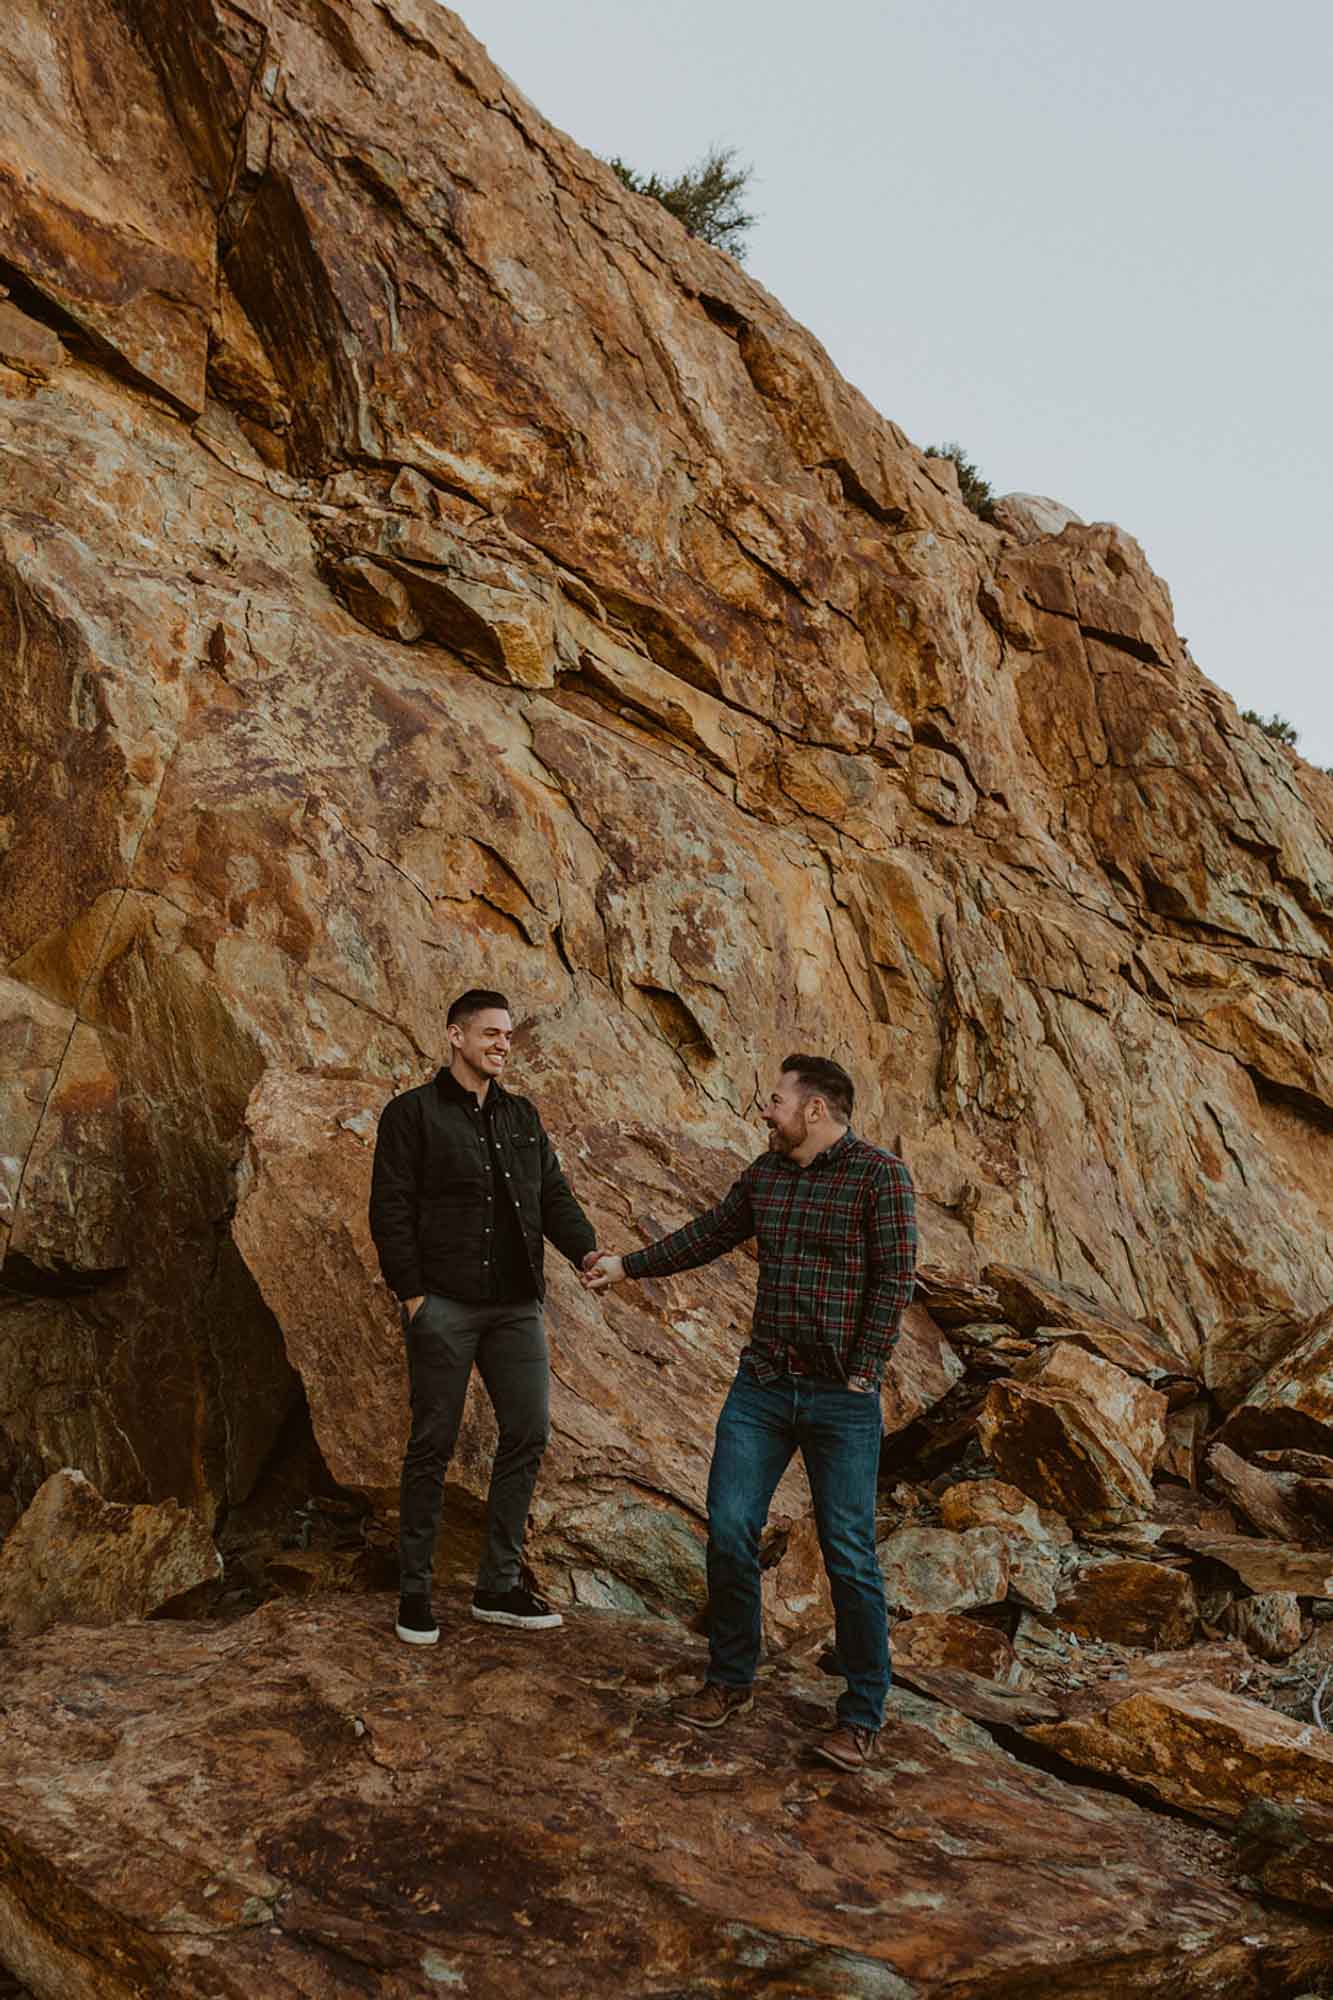 California photo session with desert, rolling hills and mountain views | Samantha Phillips Photography | Featured on Equally Wed, the leading LGBTQ+ wedding magazine